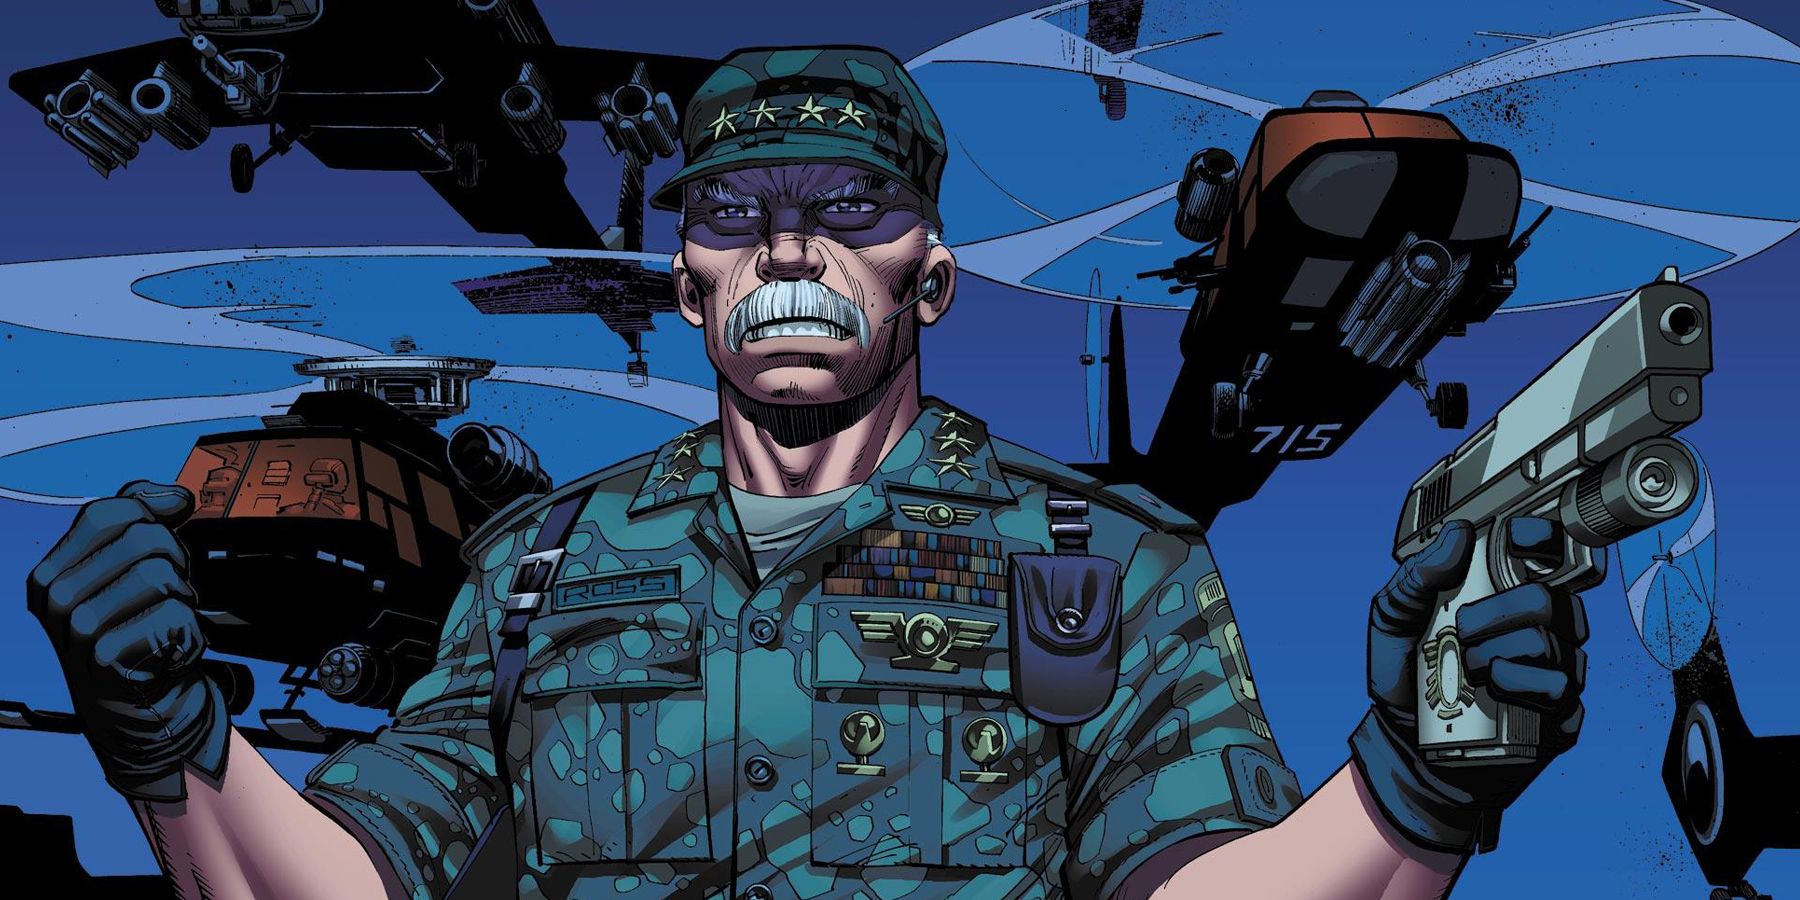 General Thunderbolt Ross Holding a Weapon Surrounded by Helicopters